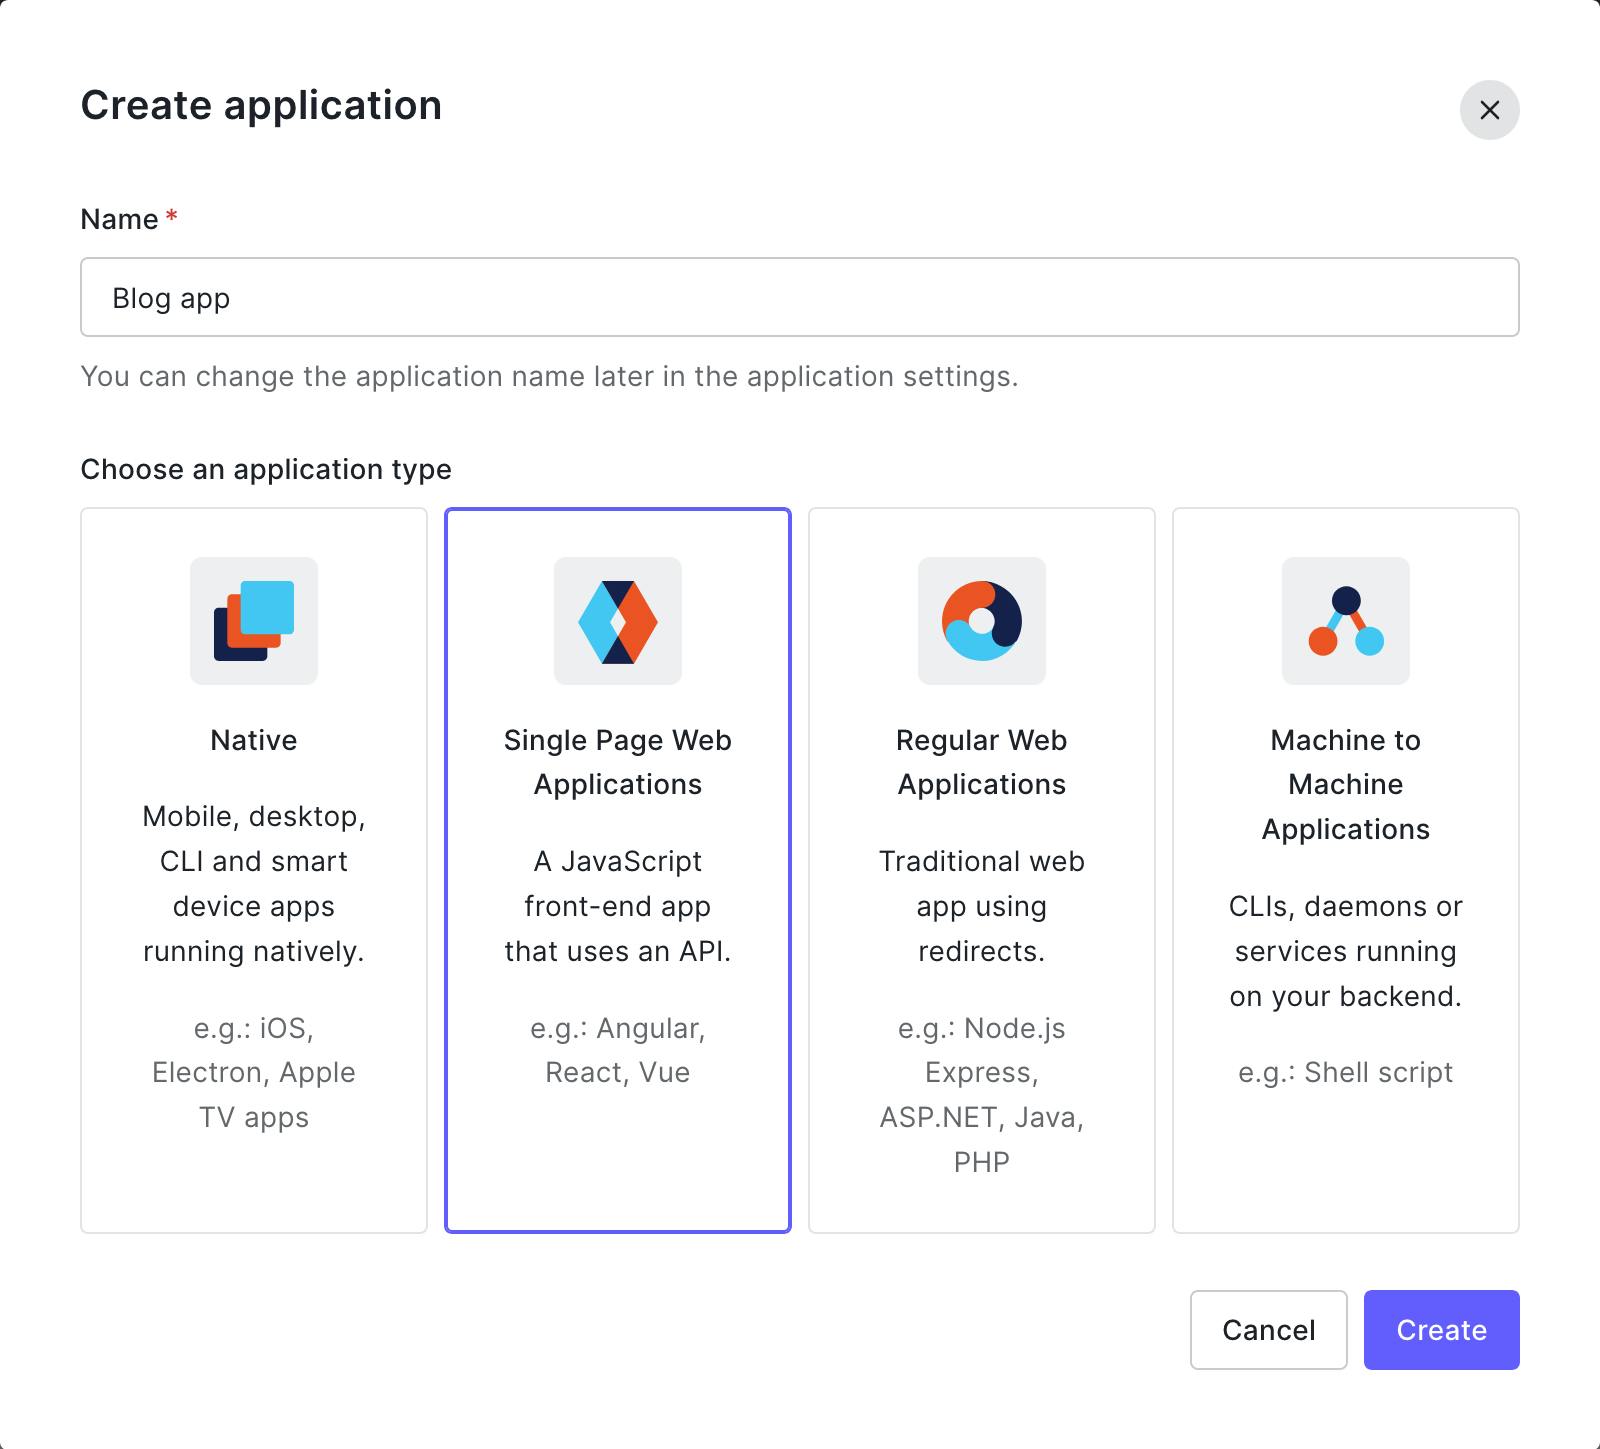 Screenshot of the Create Application form on Auth0